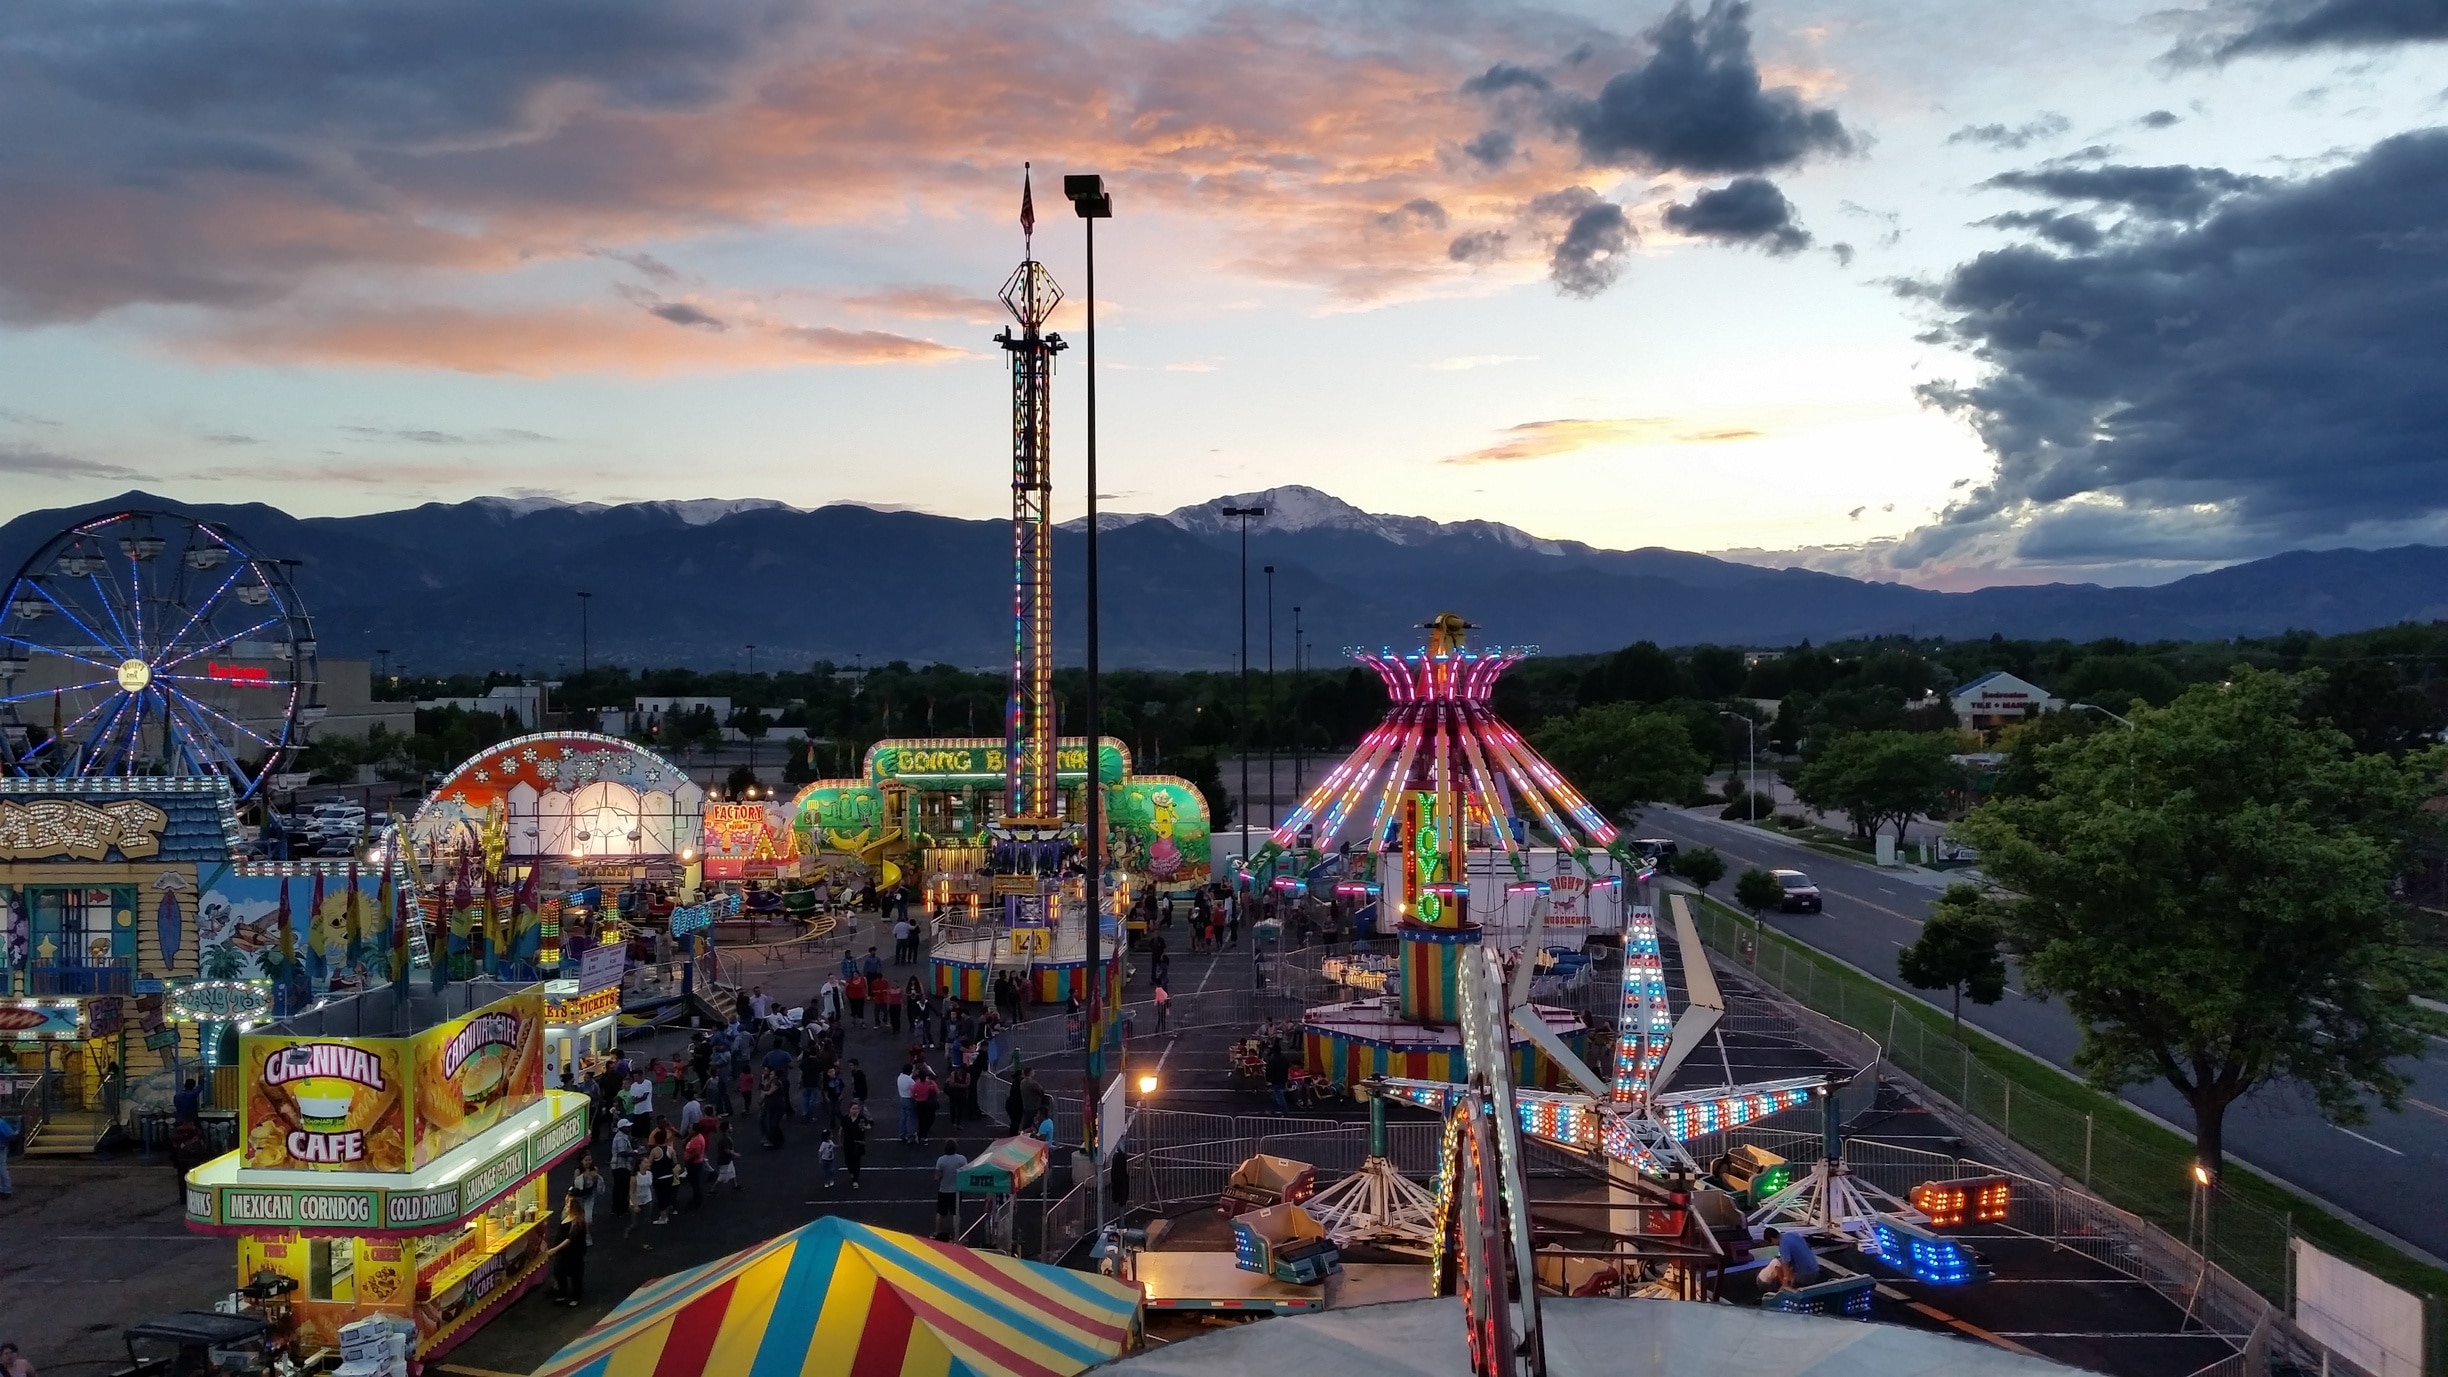 Sometimes you can get lucky and find a carnival at the mall parking lot. We rode the ferris wheel at the perfect time to catch this great sunset. 
#Colorful #Colorado #Carnival